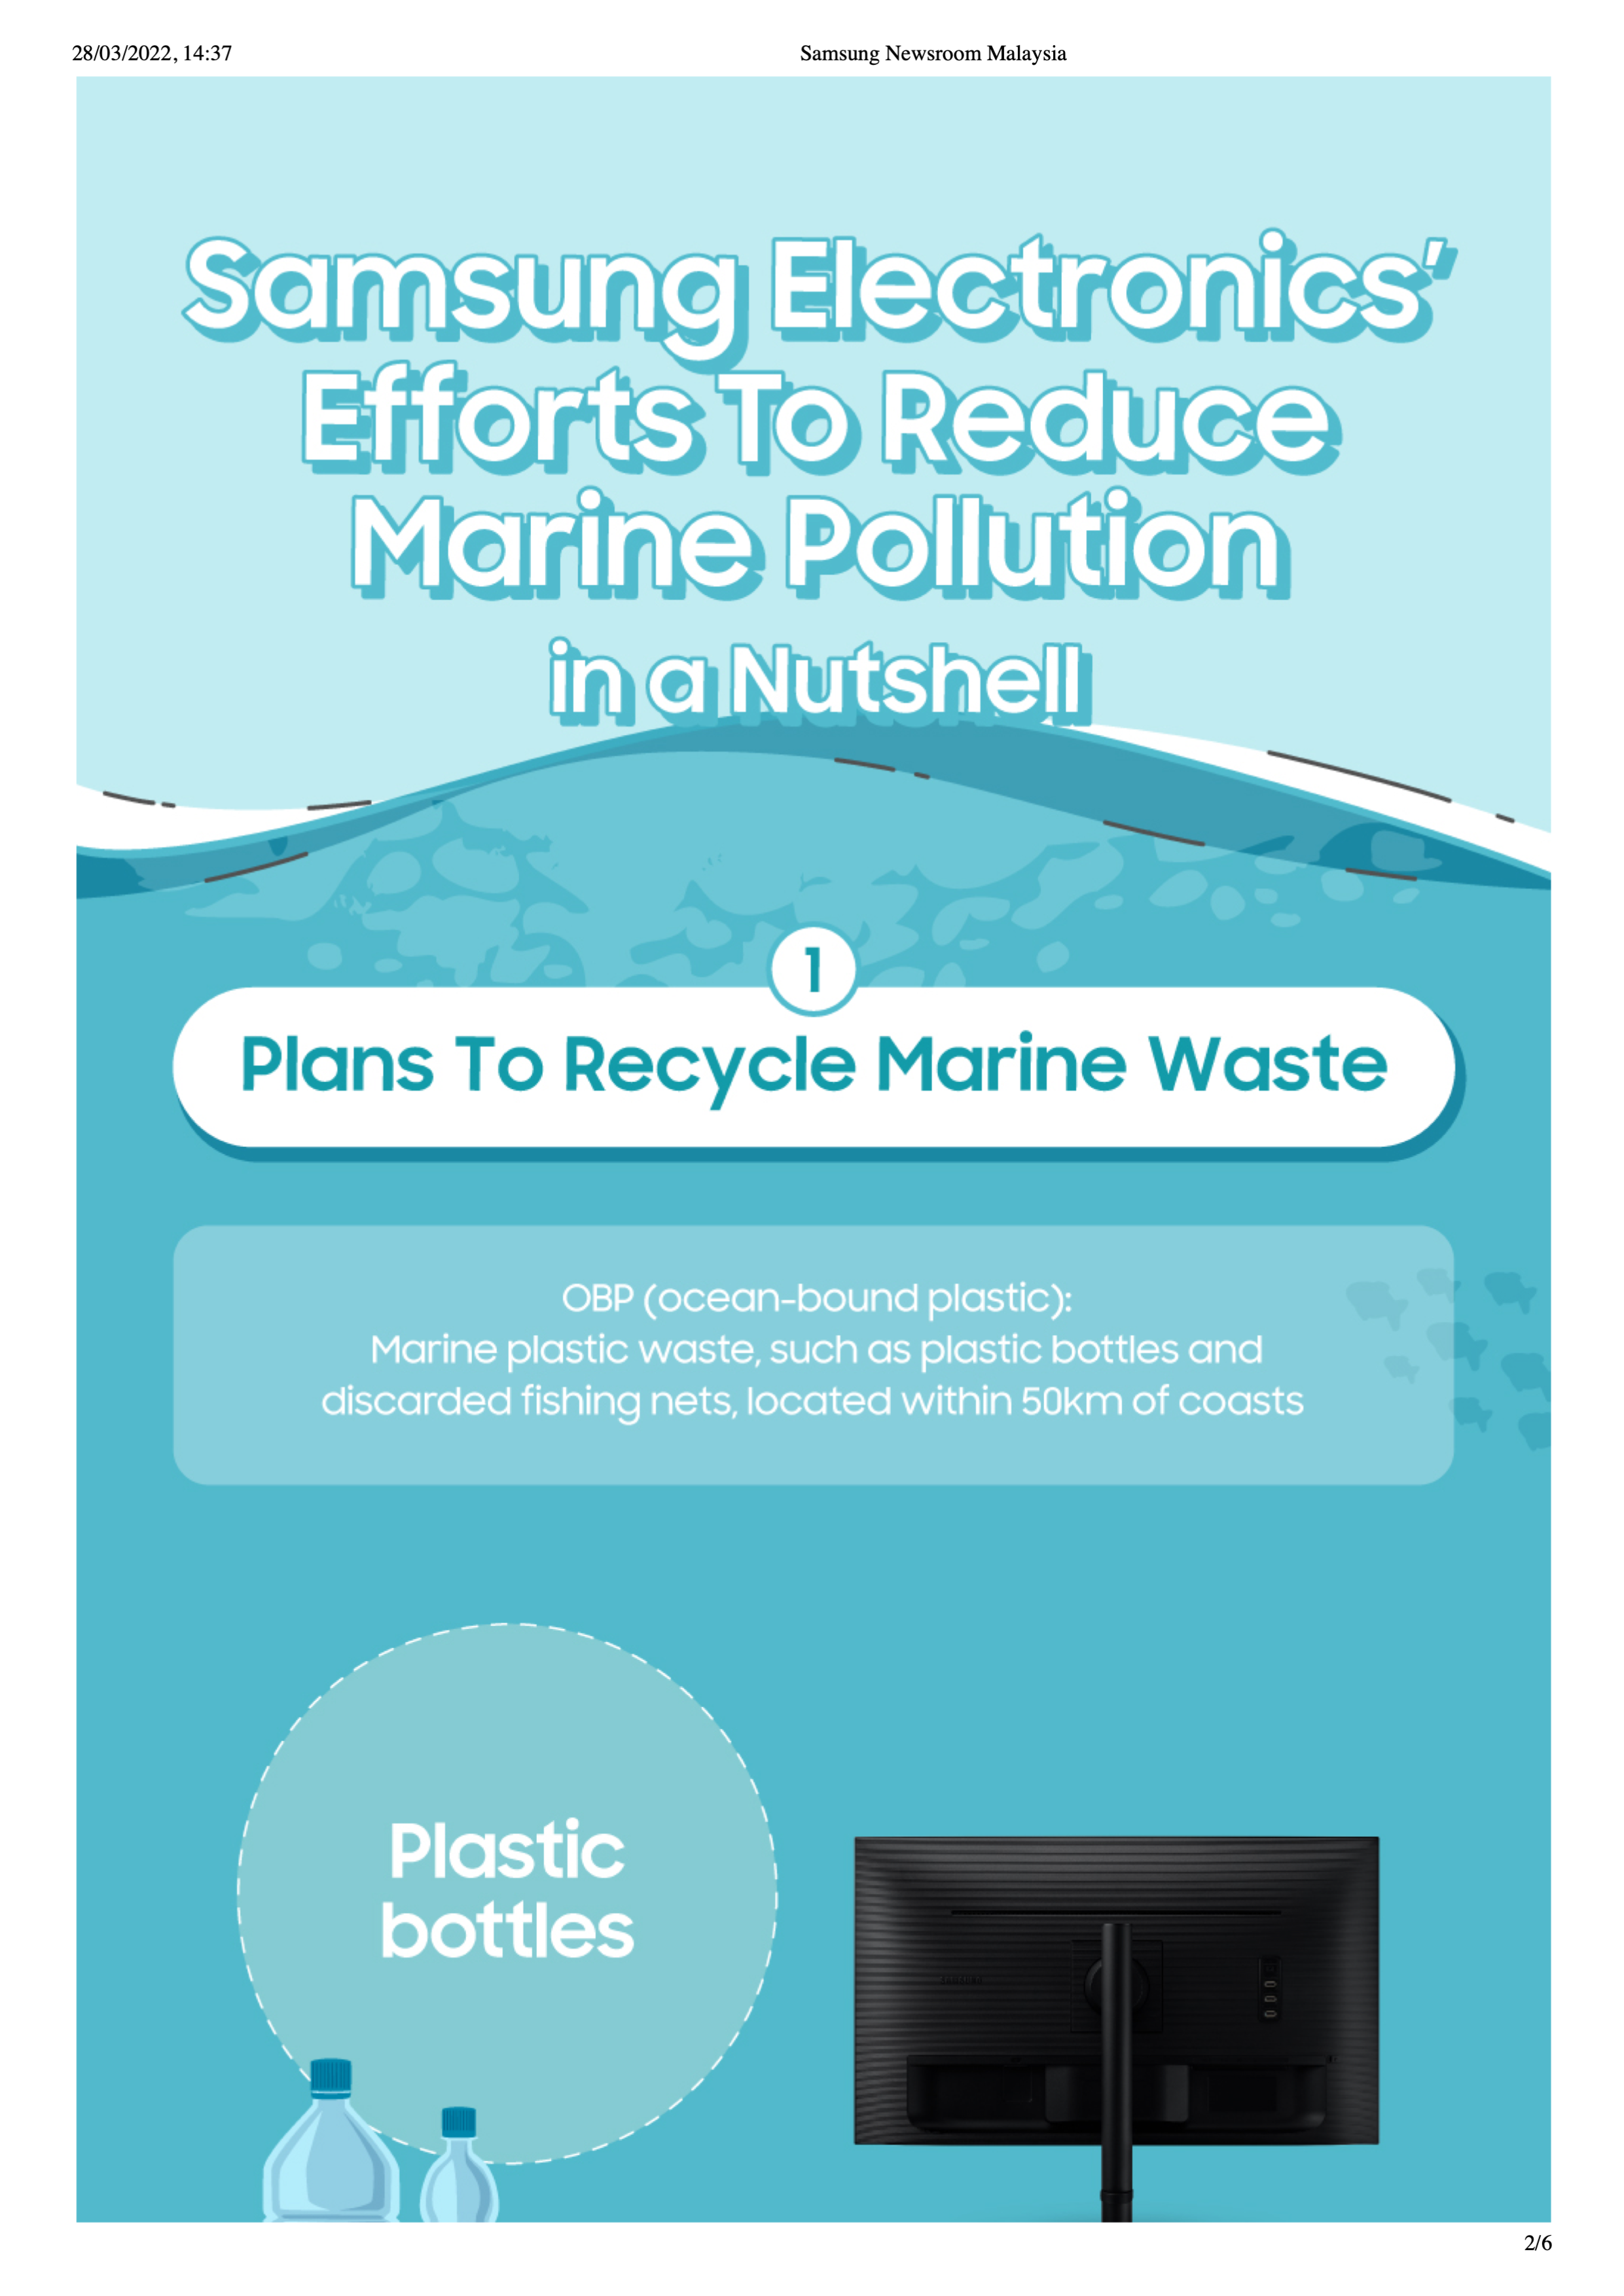 [Infographic] Samsung Electronics’ Efforts To Reduce Marine Pollution in a Nutshell